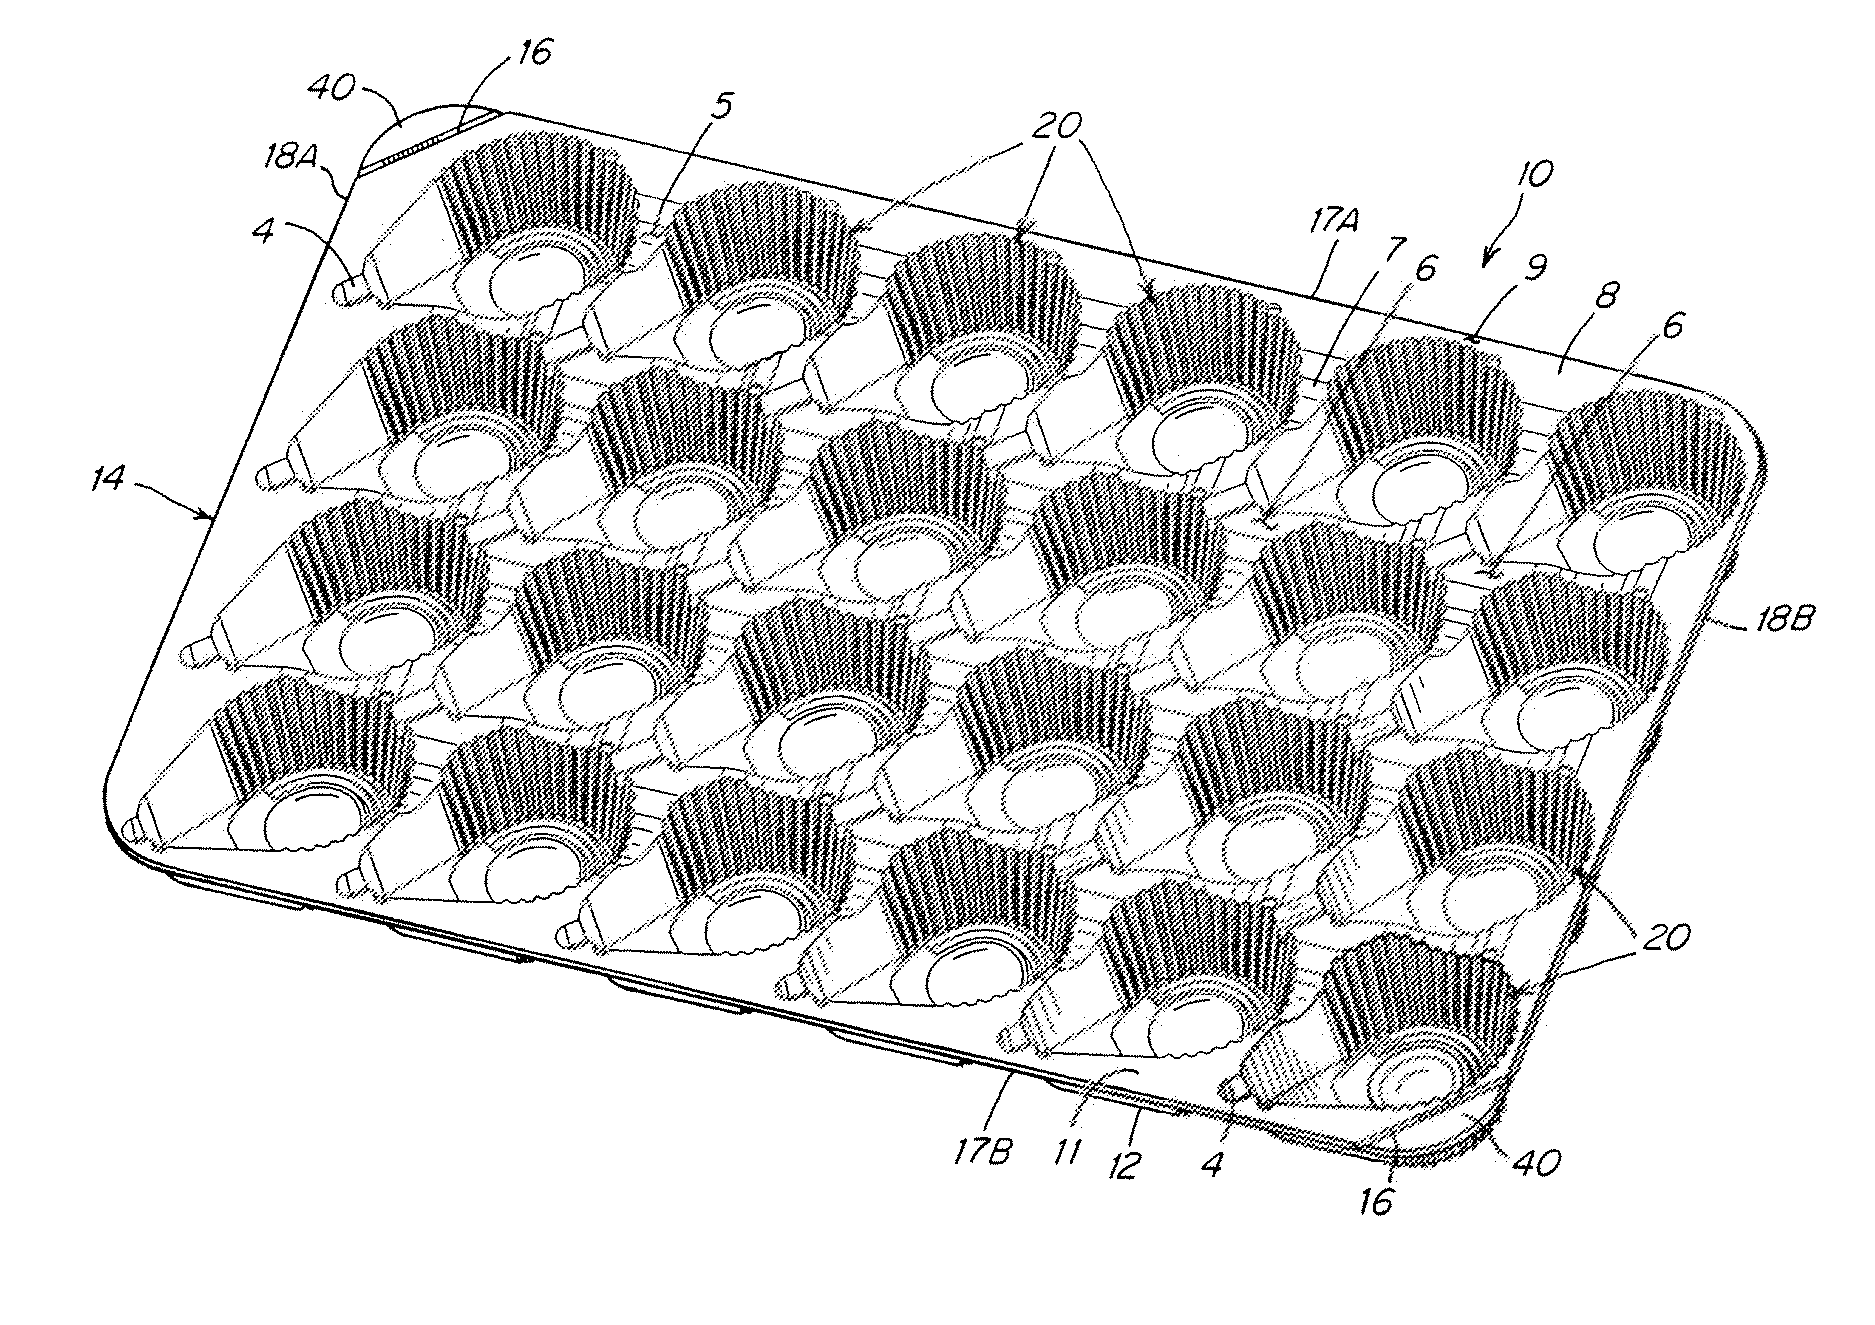 Packing tray having cell pockets with expandable sidewalls and floating base, and method of manufacture